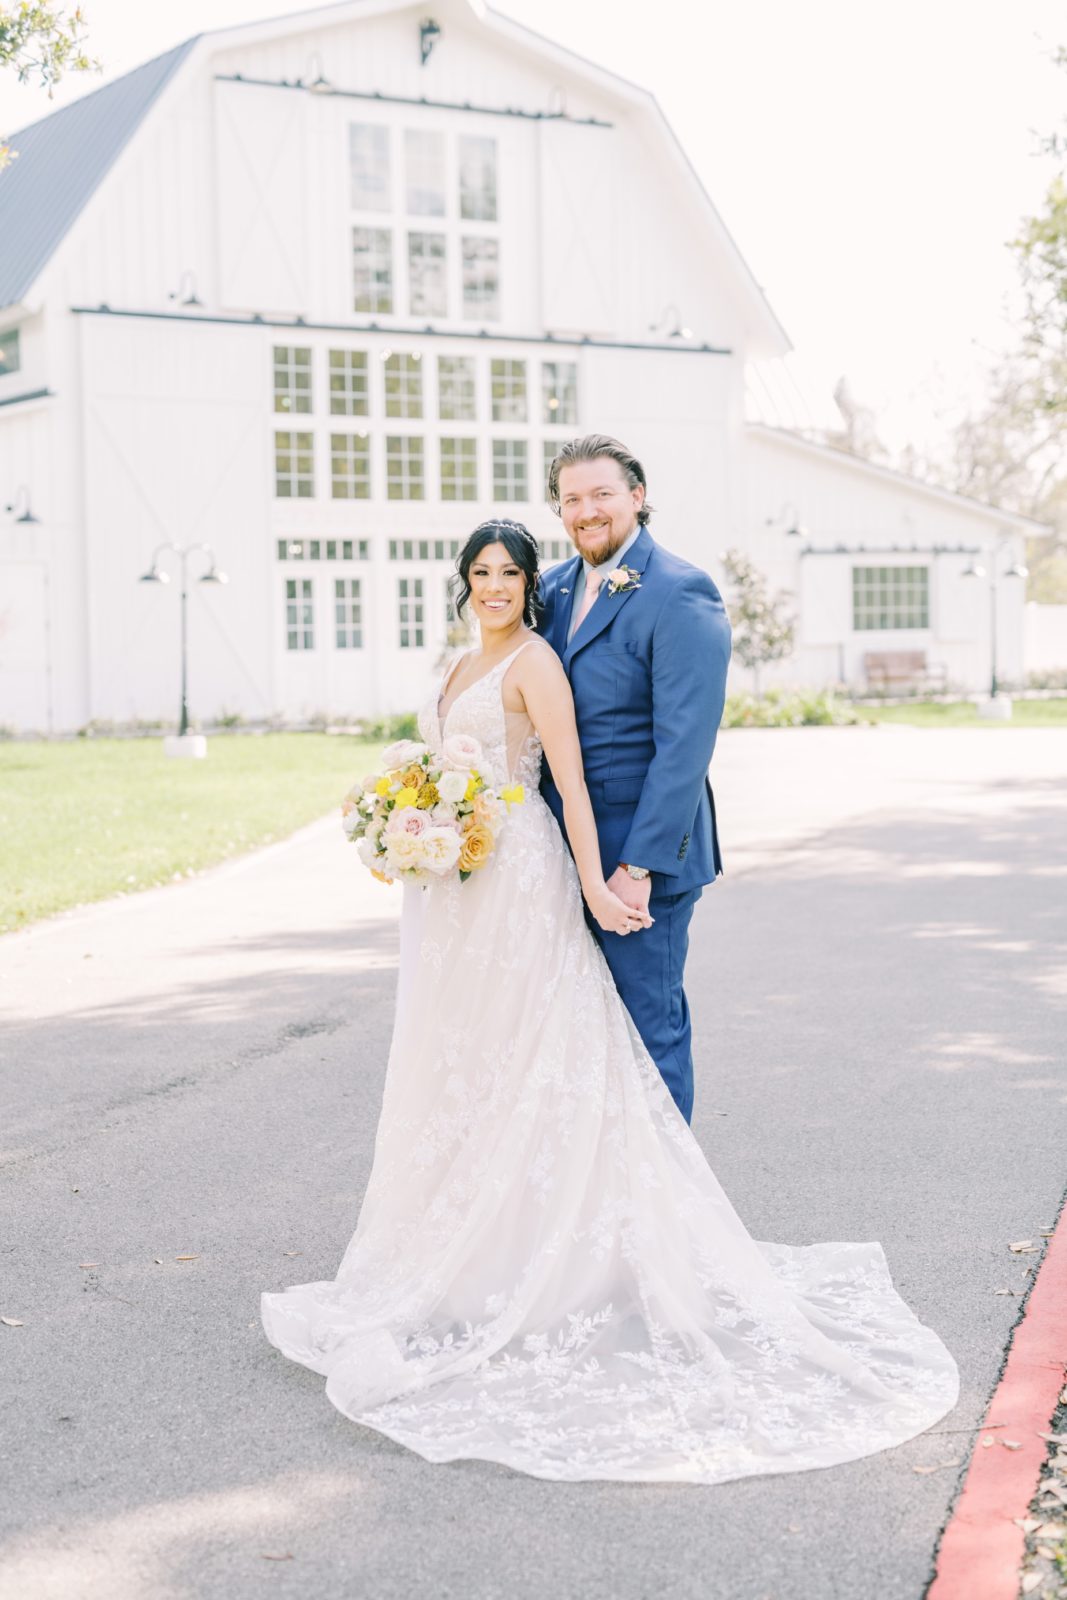 Holding hands a bride and groom smile in front of a southern barn on their wedding day by Christina Elliott Photography. blue suit #ChristinaElliottPhotography #ChristinaElliottWeddings #Houstonwedding #TheSpringsVenue #EastHoustonweddings #Mrs #Mr